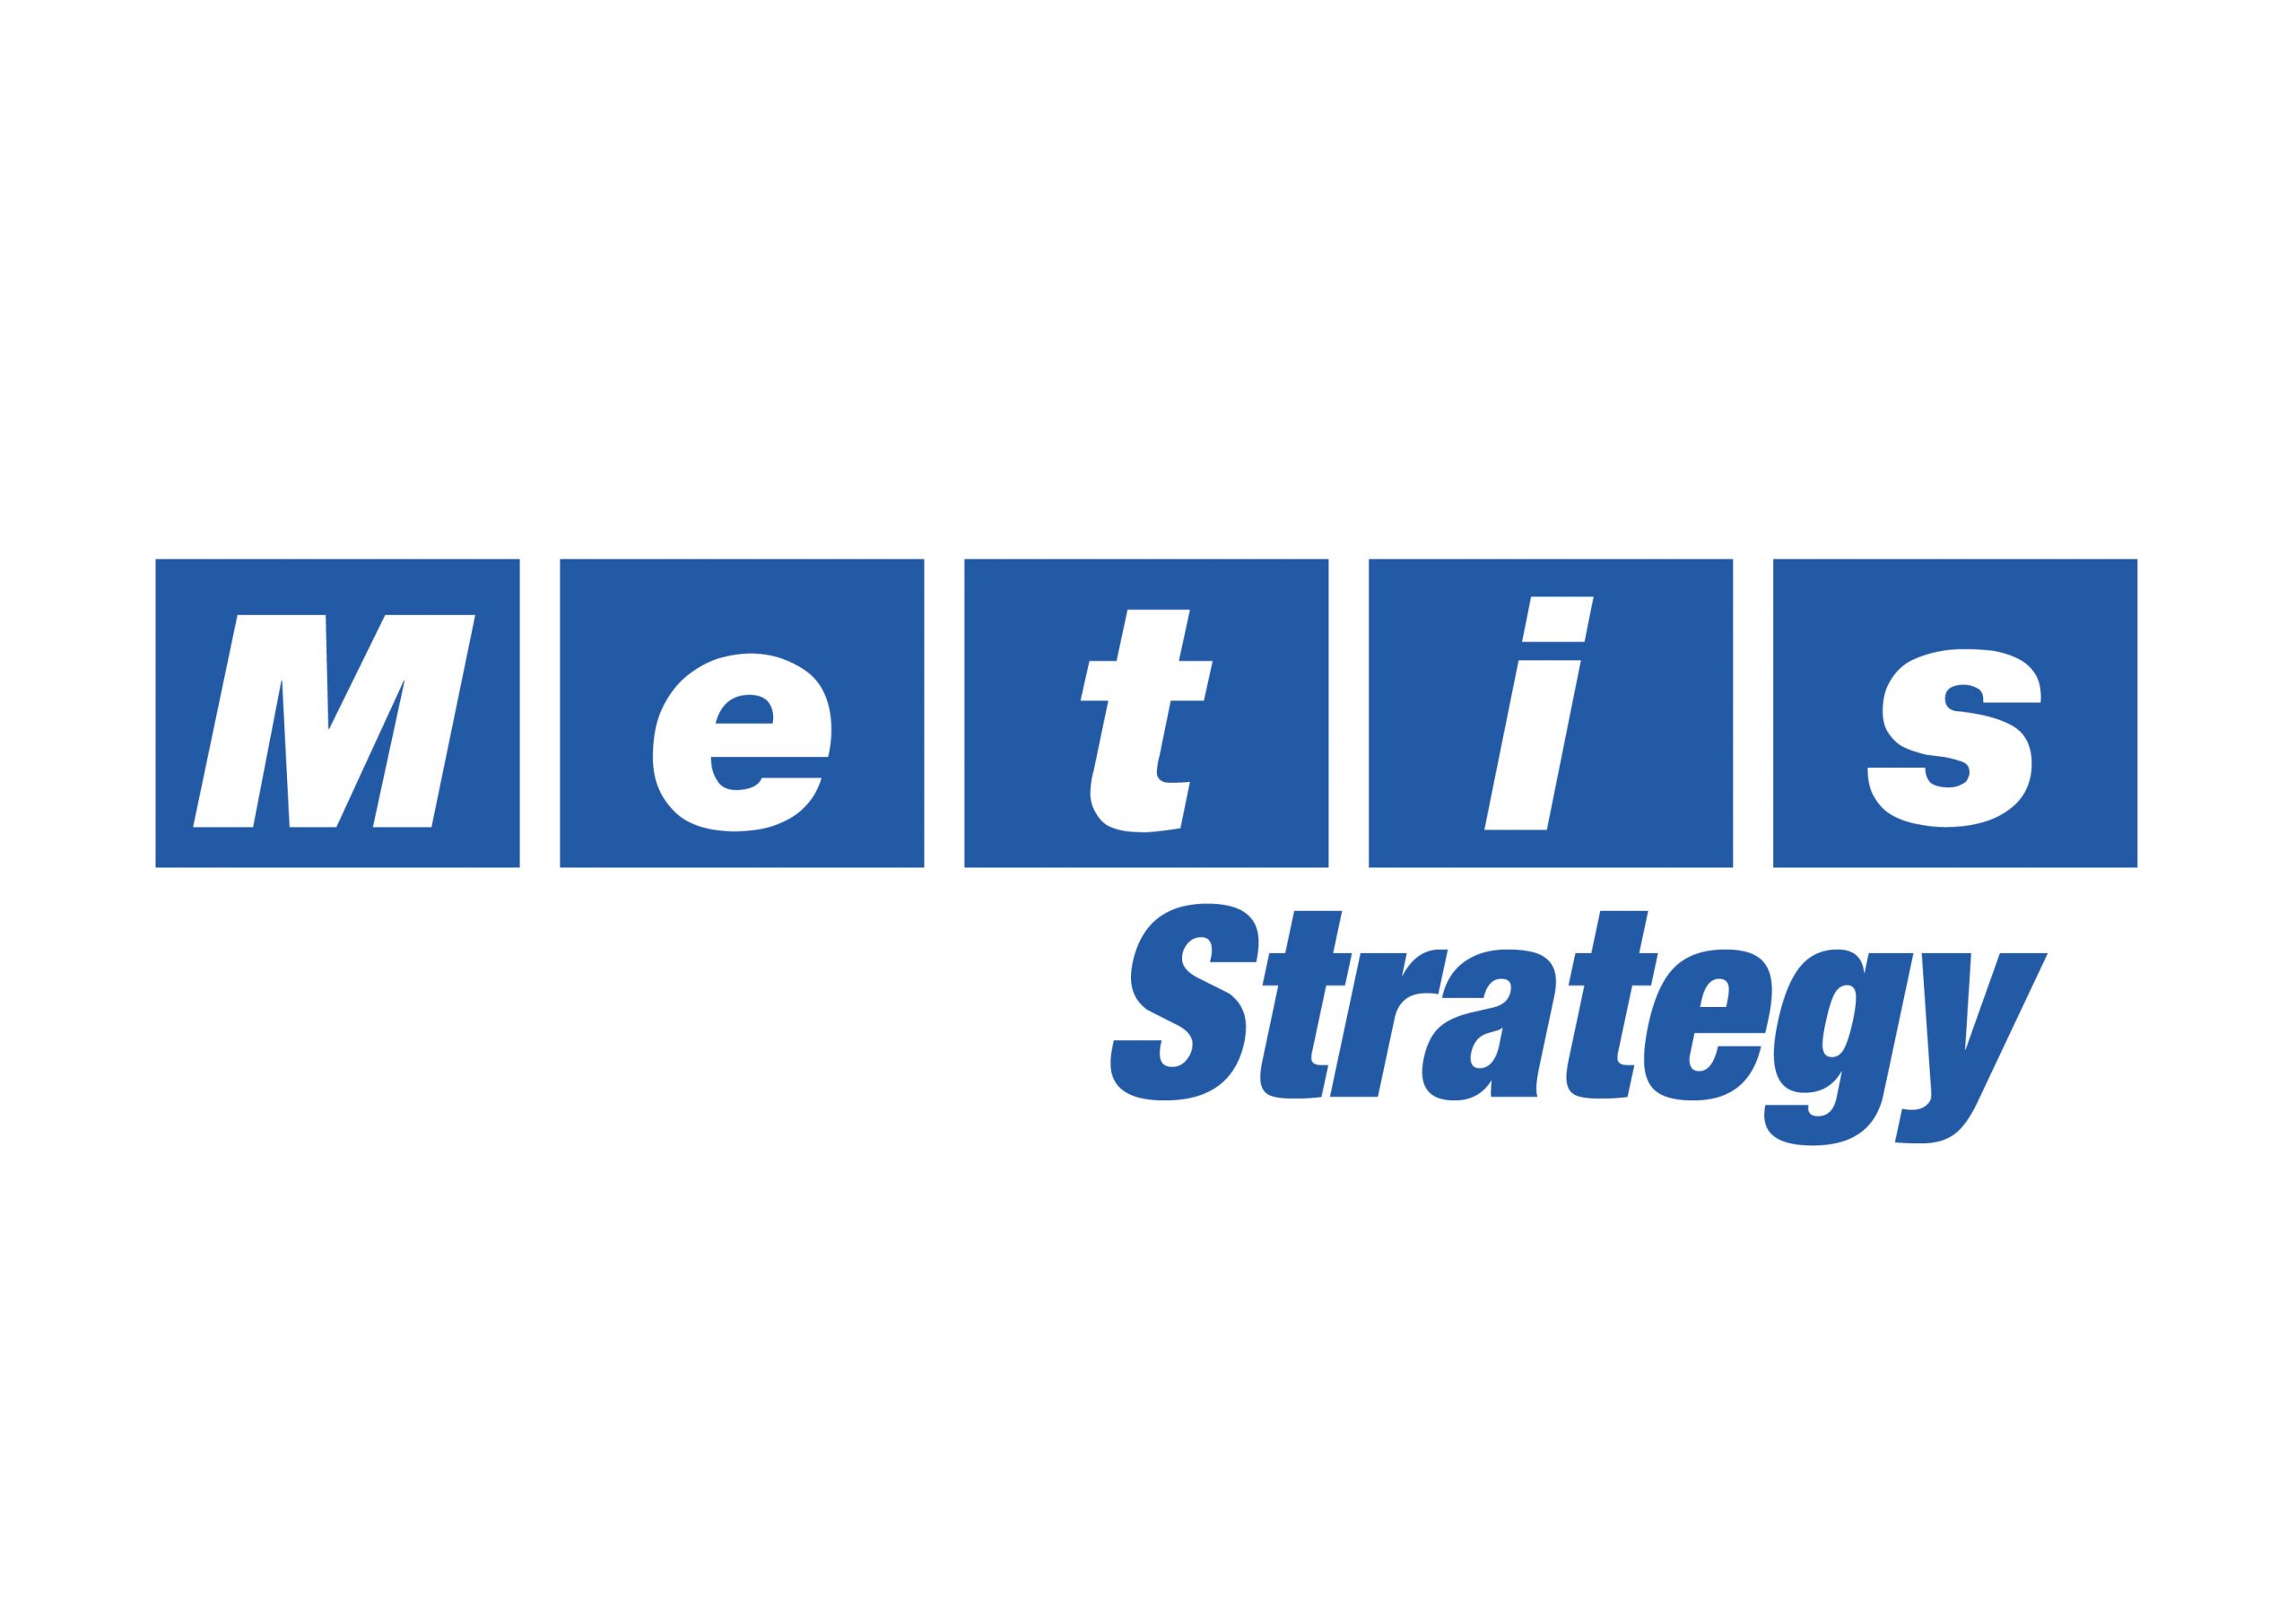 Founded Metis Strategy in 2001